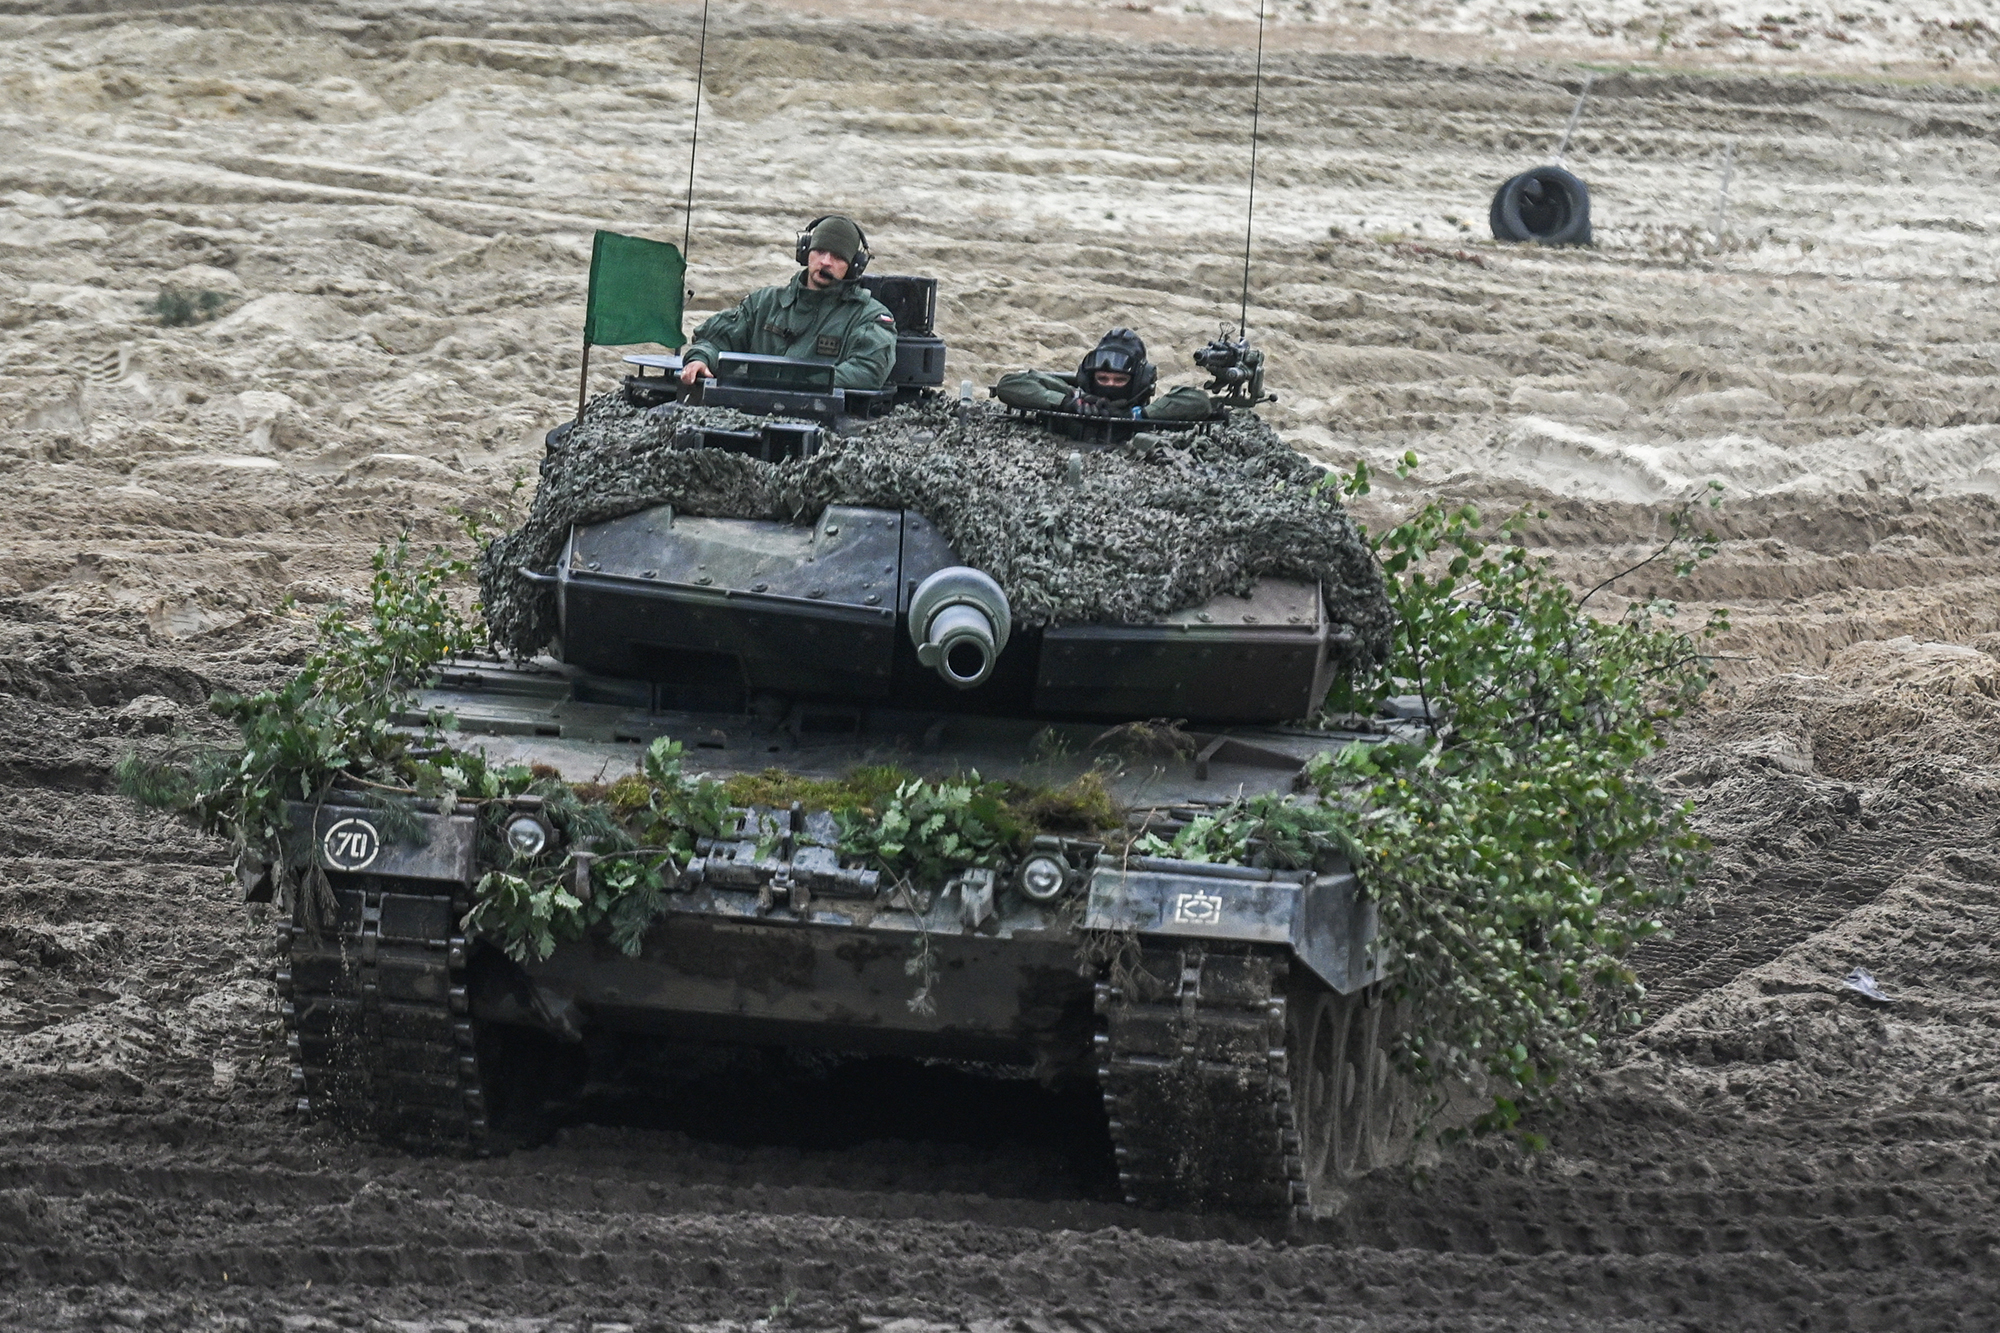 The Polish Army drives a Leopard tank during a live fire demonstration as part of the Bear 22 military exercise at the Nowa Deba training ground on September 21 in Nowa Deba, Poland. 